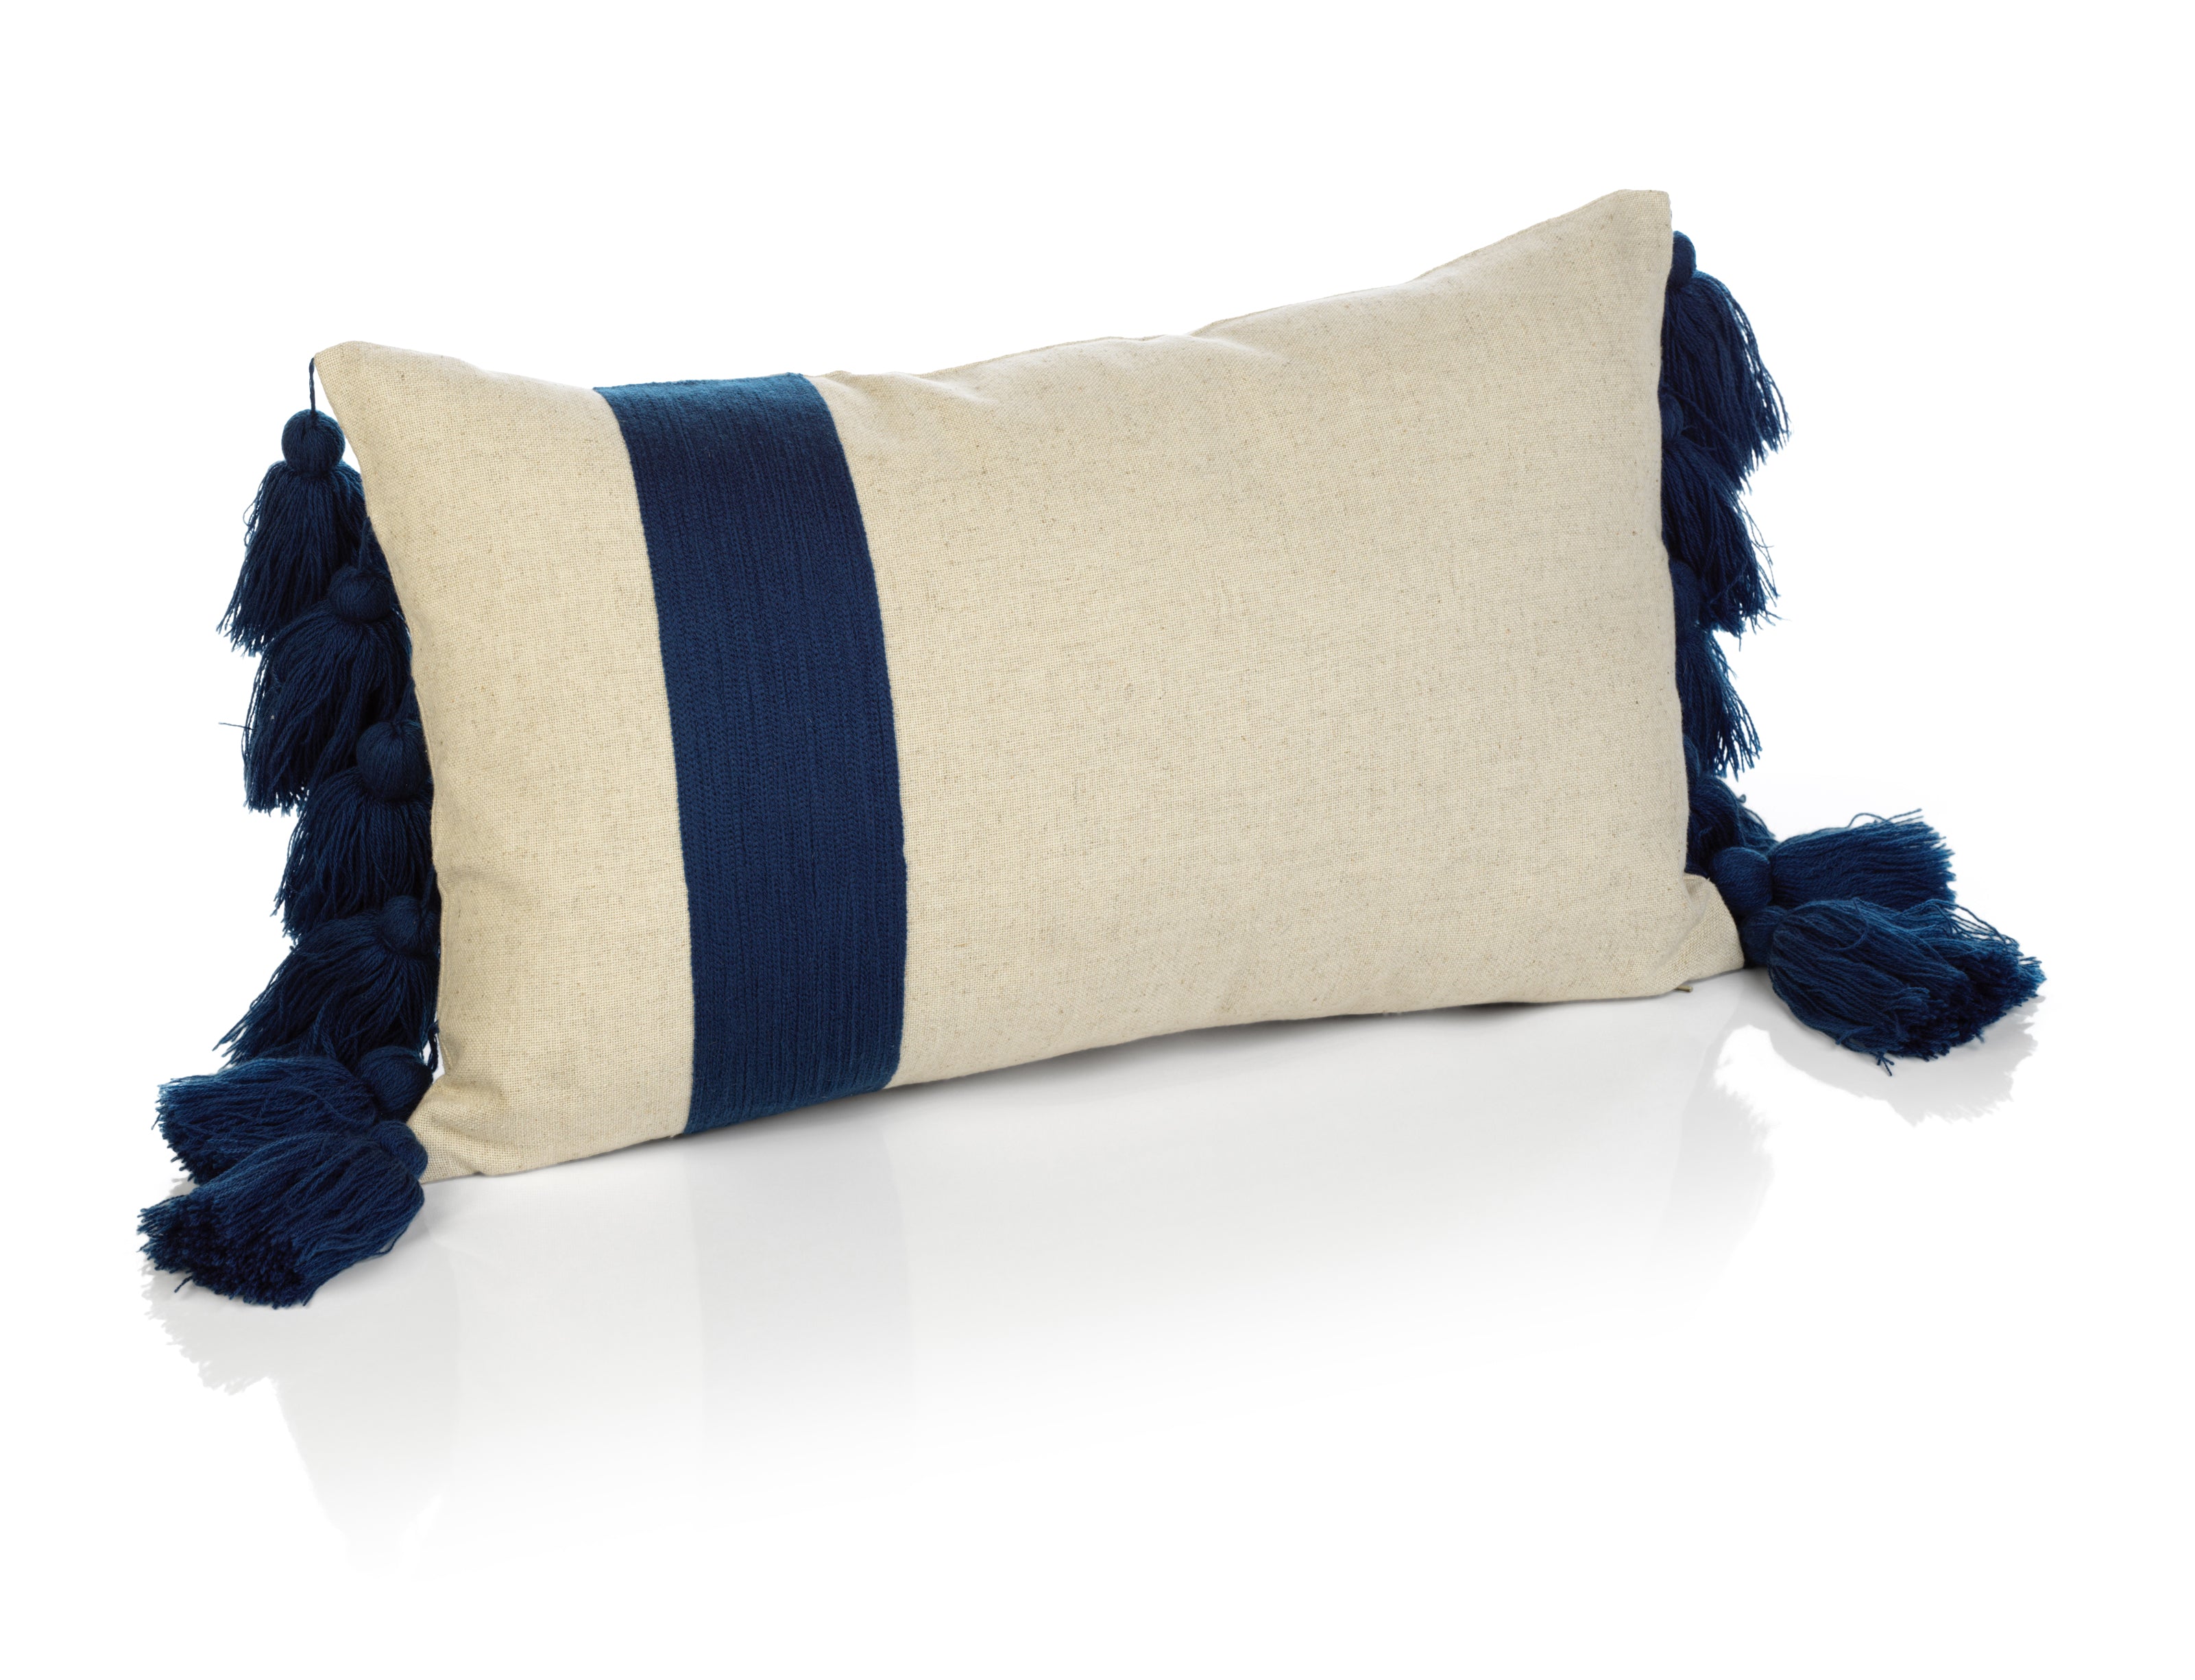 Polignano Embroidered Throw Pillow w/Tassels - Navy - CARLYLE AVENUE